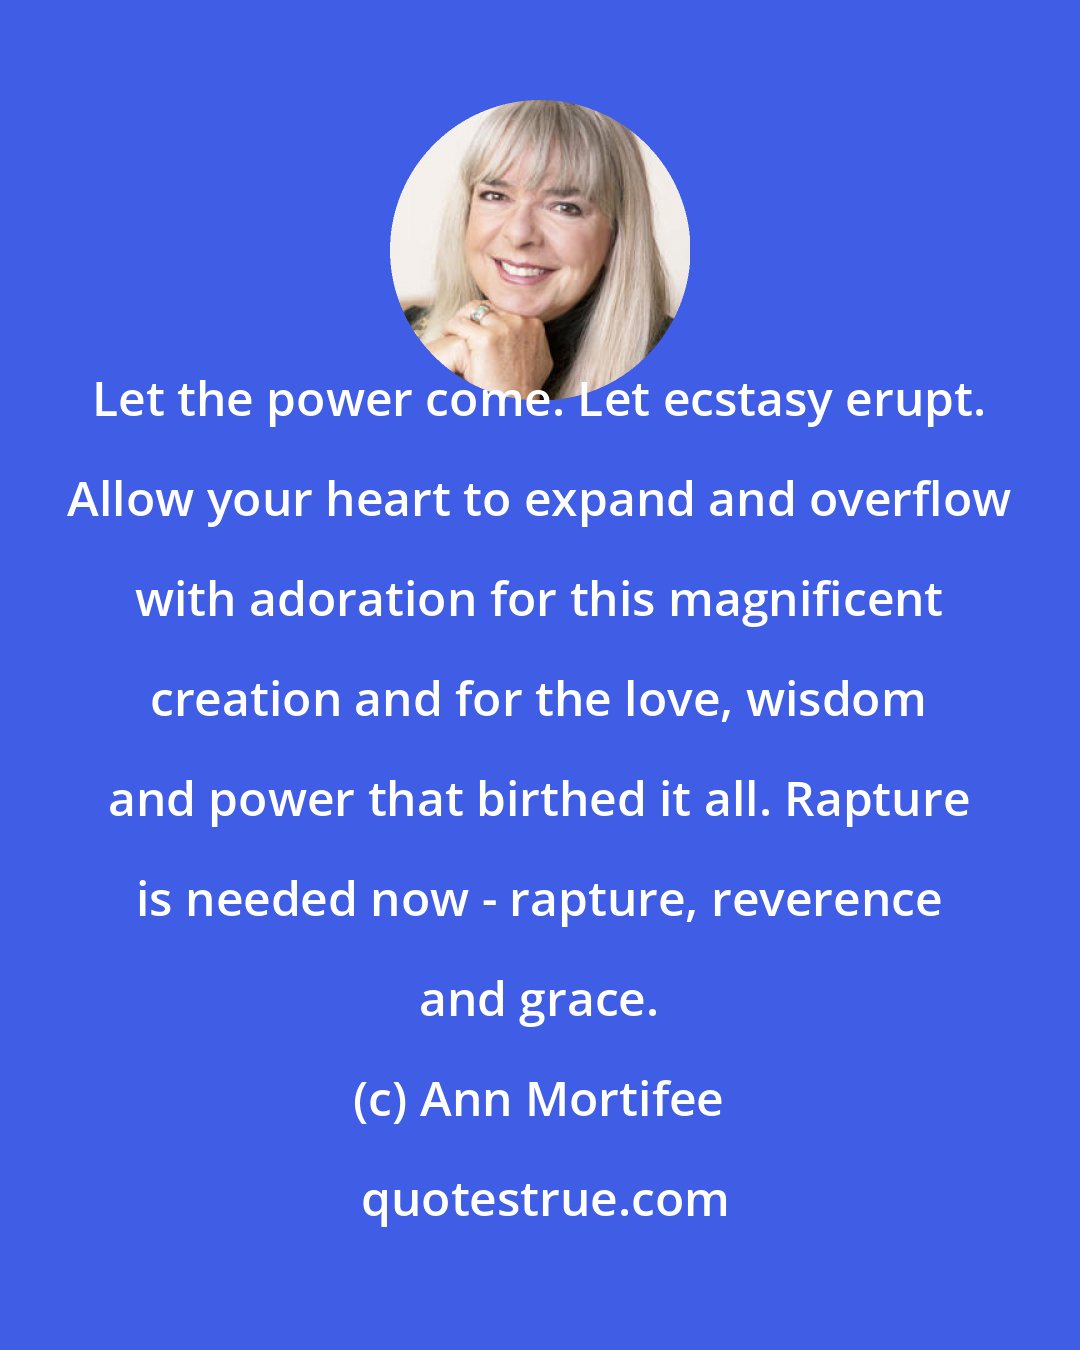 Ann Mortifee: Let the power come. Let ecstasy erupt. Allow your heart to expand and overflow with adoration for this magnificent creation and for the love, wisdom and power that birthed it all. Rapture is needed now - rapture, reverence and grace.